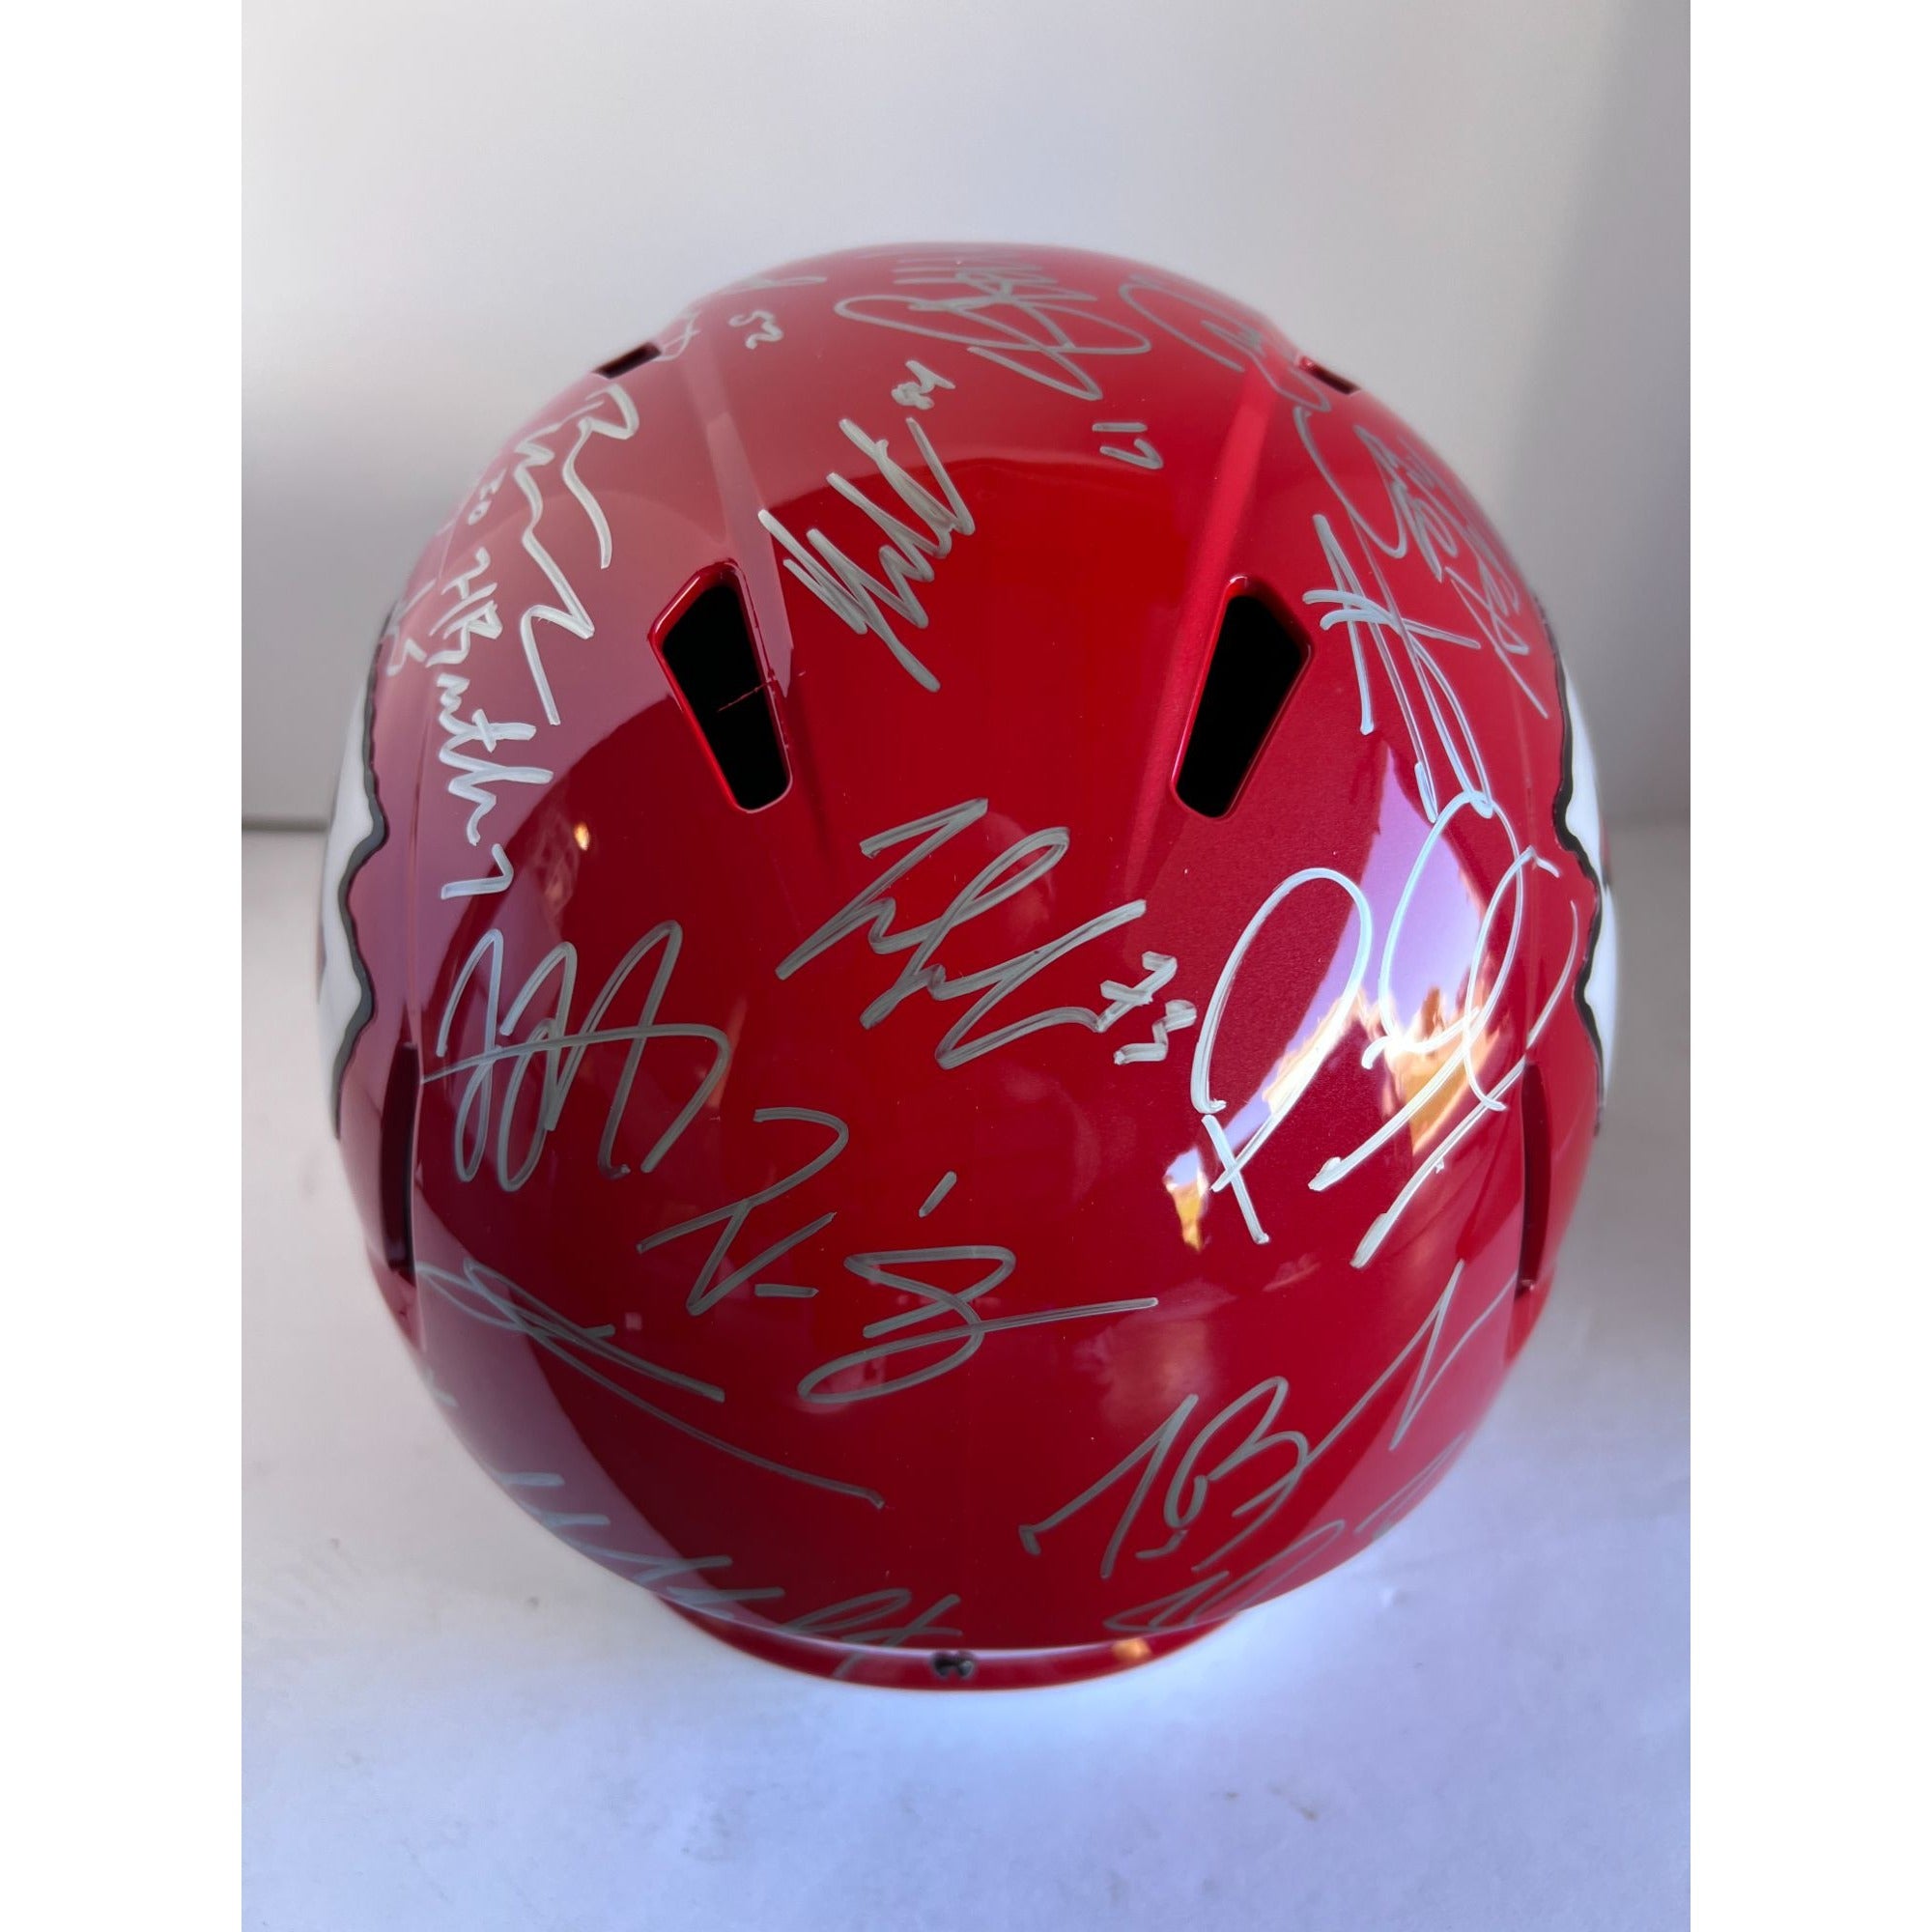 Kansas City Patrick Mahomes Andy Reid Travis Kelce 2022-23 Super Bowl champions Riddell Speed full size helmet team signed with proof